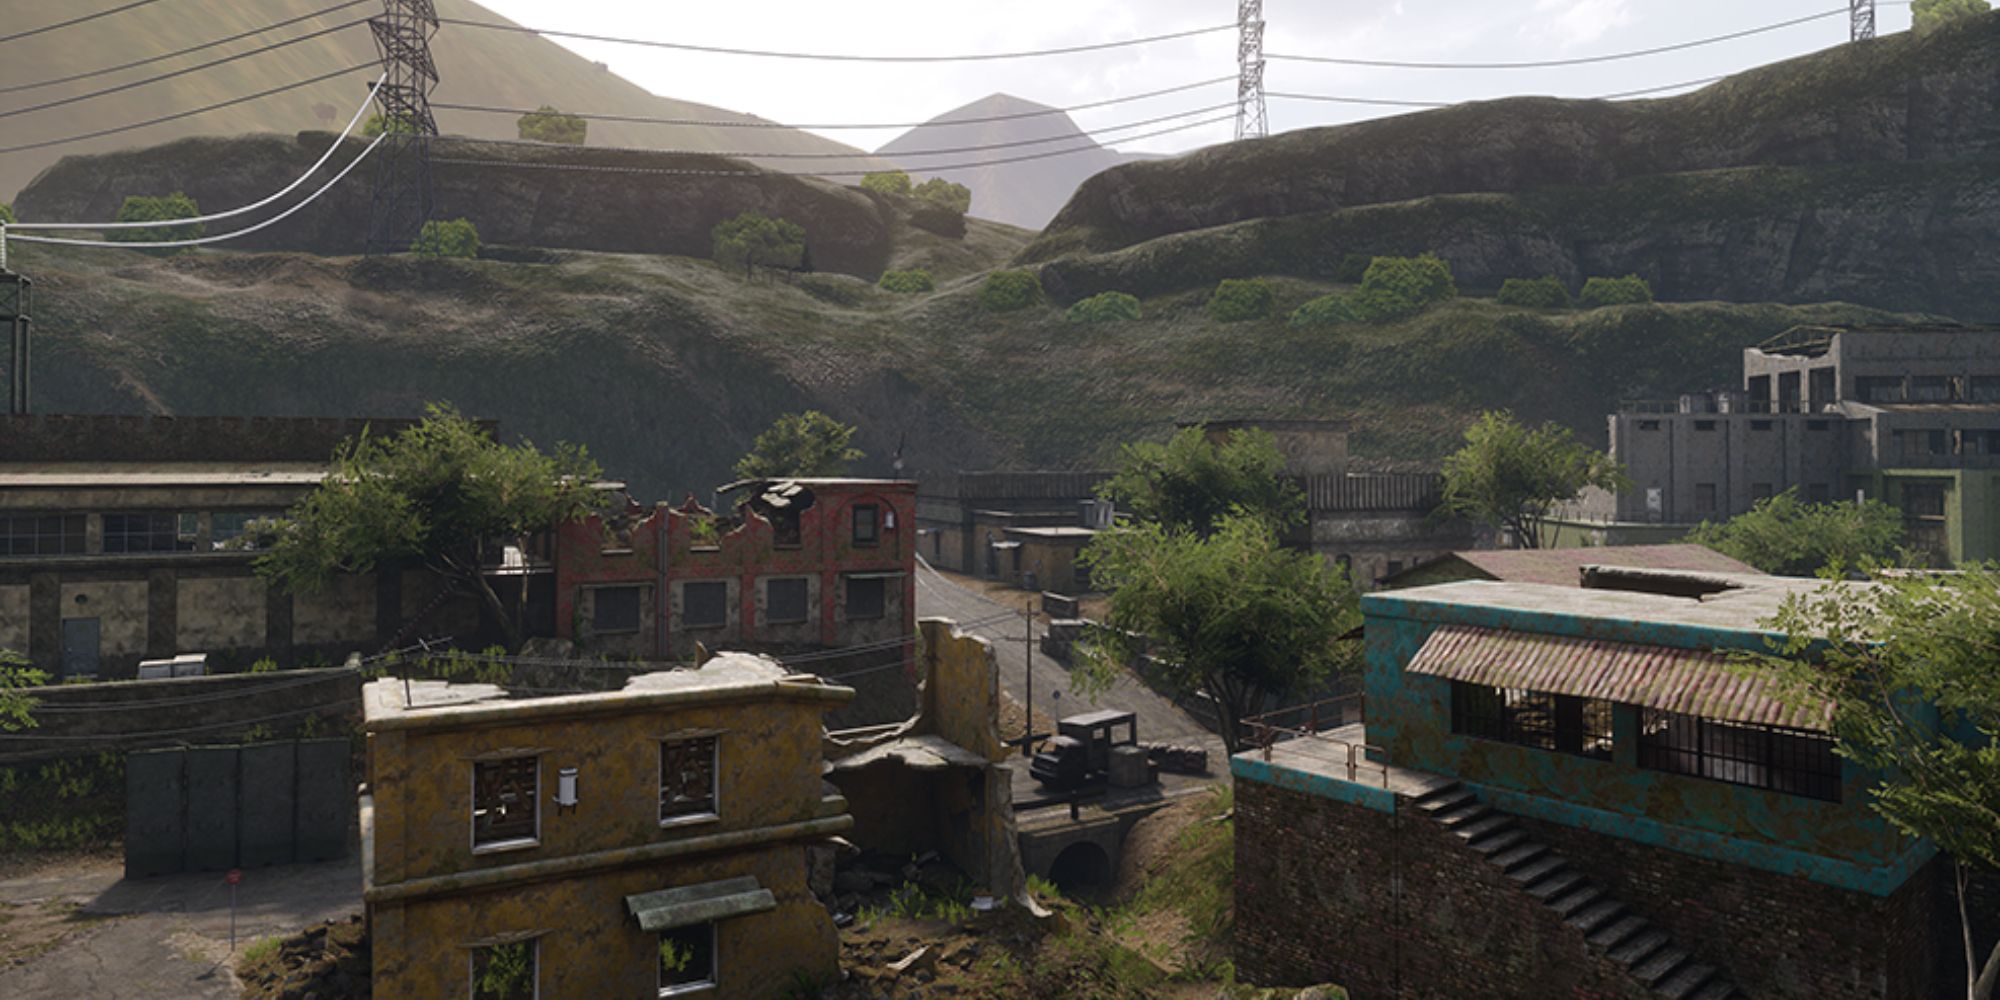 Insurgency Sandstorm Maps a wide shot of the map Power Plant with colourful ruined buildings in the foreground surrounded by green trees with towering transmission towers in the distance